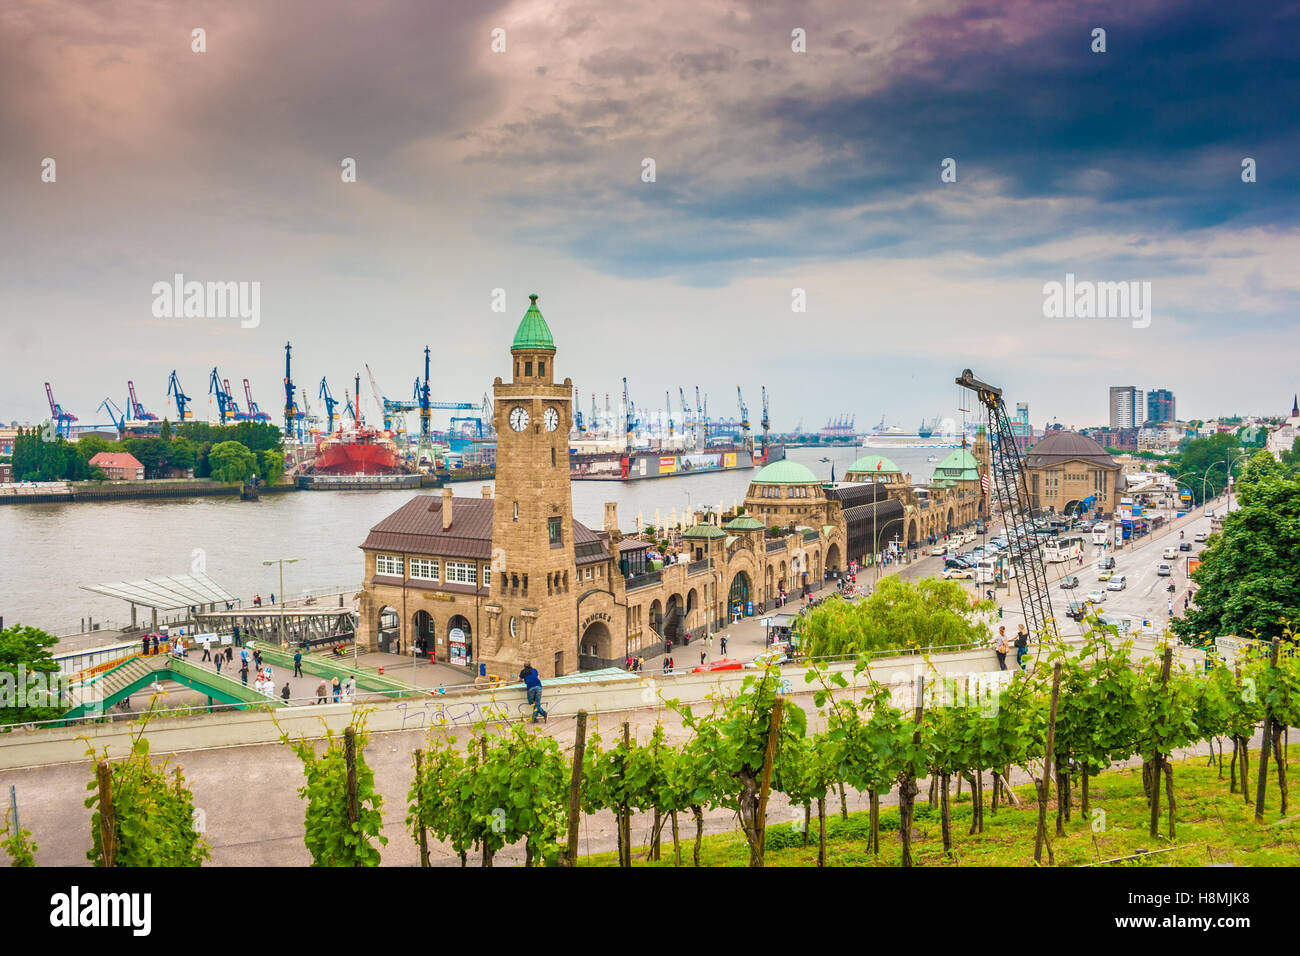 Famous Hamburger Landungsbrücken with commercial harbor and Elbe river, St. Pauli district, Hamburg, Germany Stock Photo